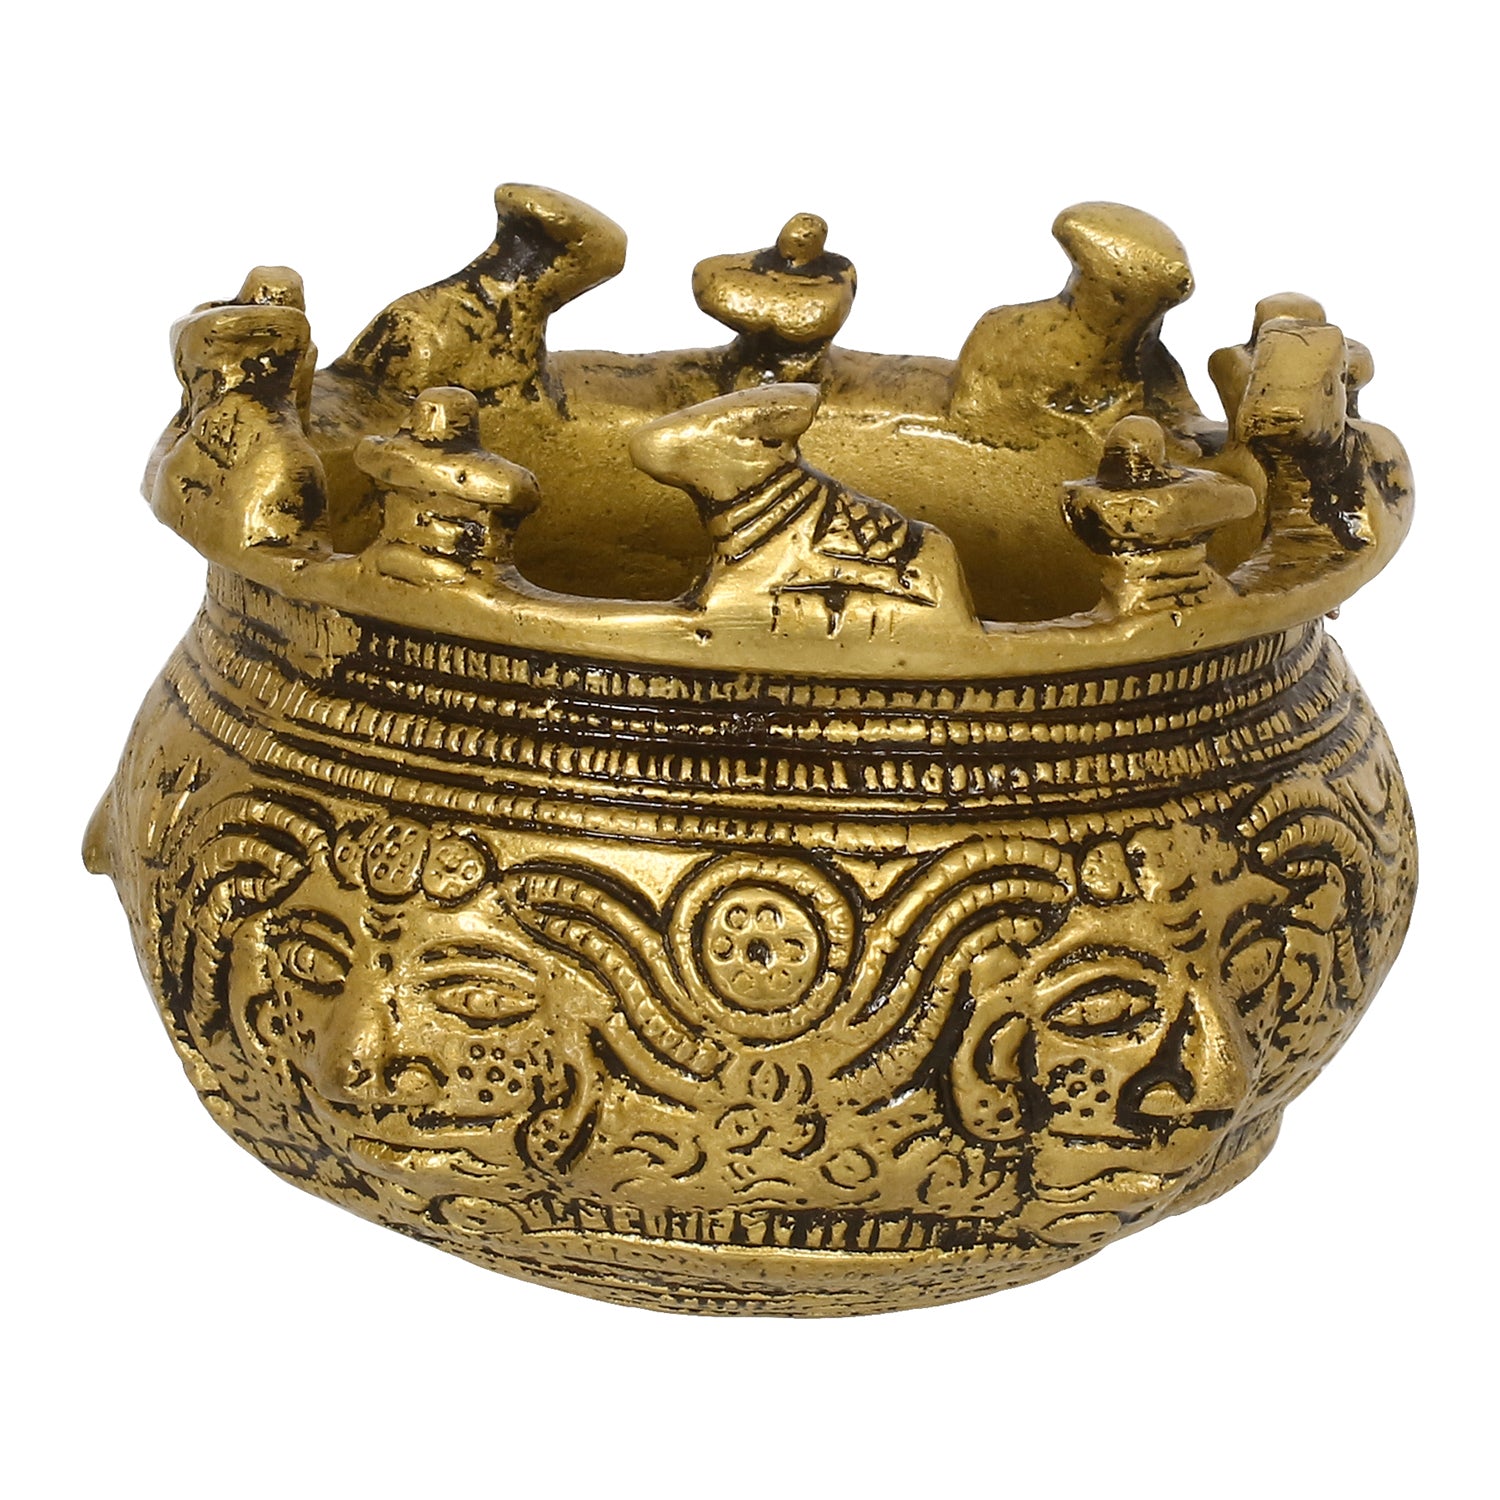 Golden Brass Auspicious Kalash, Shivling And Nandi On The Rim Of The Kalash/Pot For Religious Offerings 5